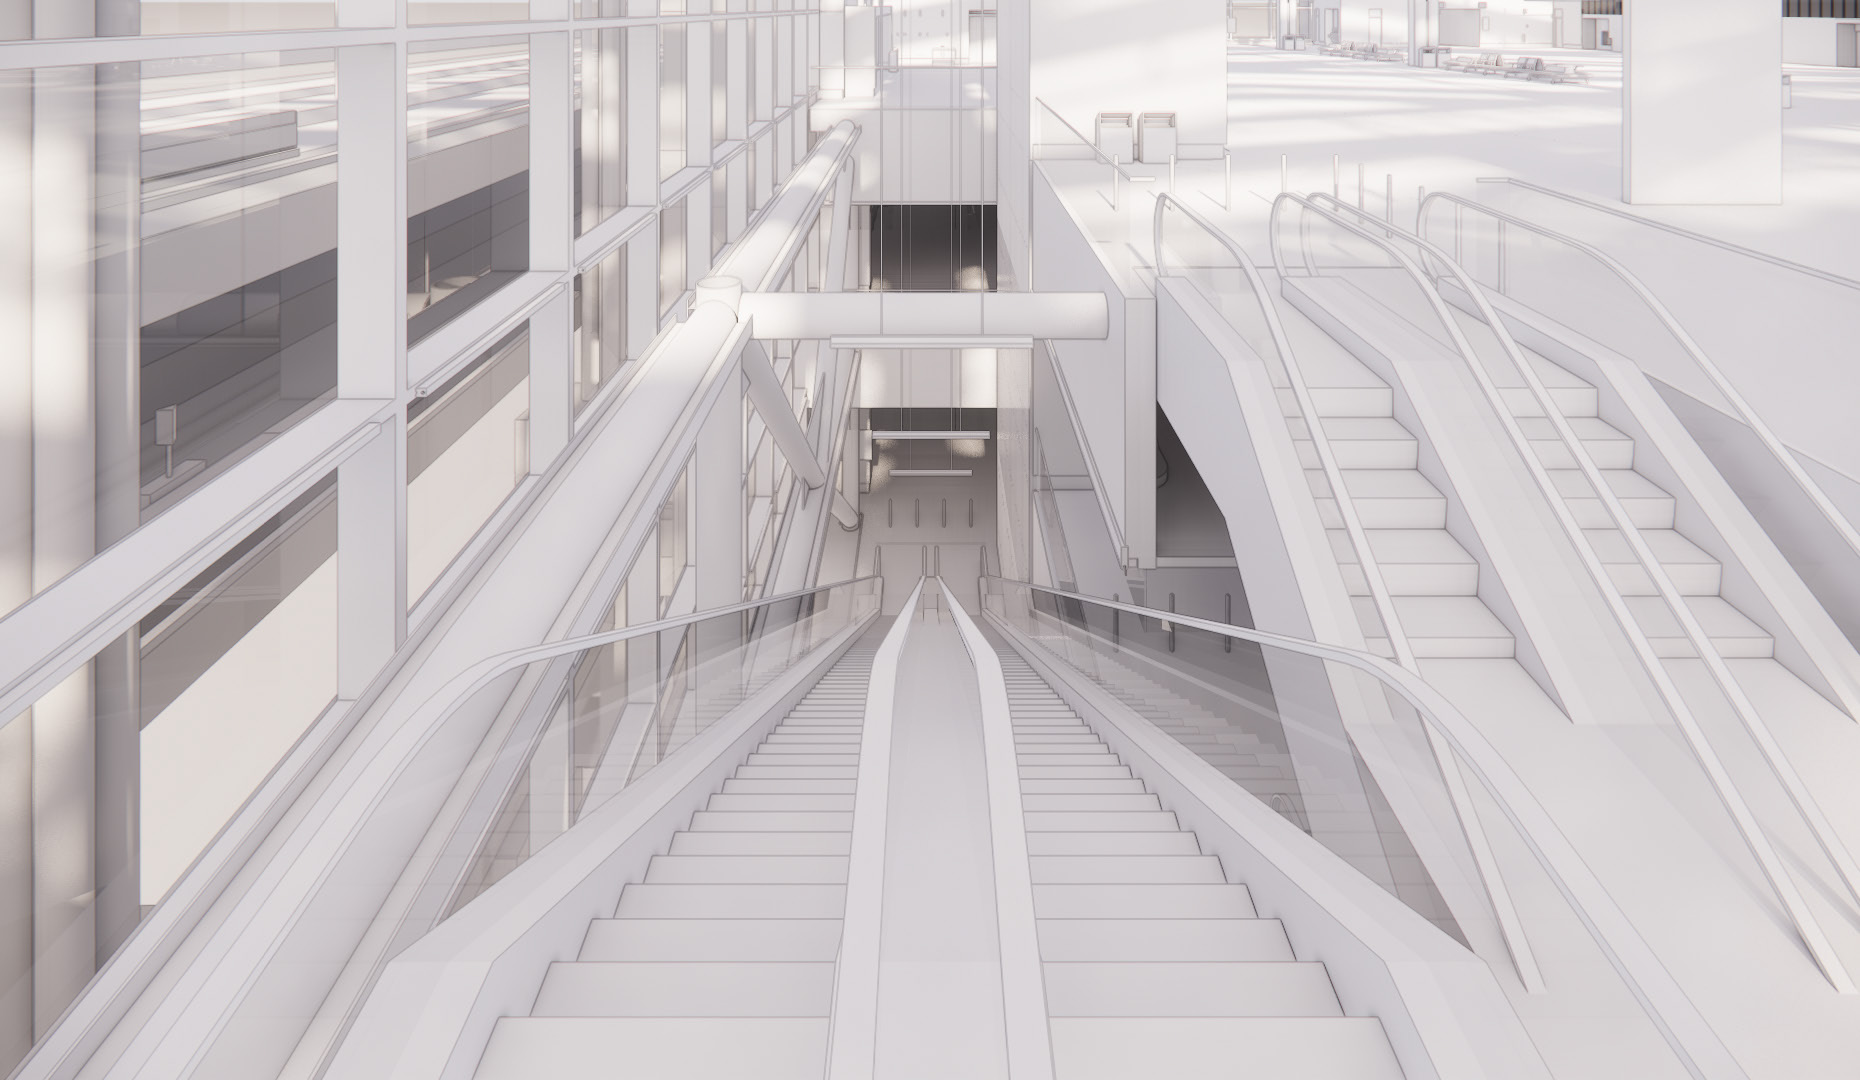 Monotone rendered image of an escalator. The view is from the top of the escalator.